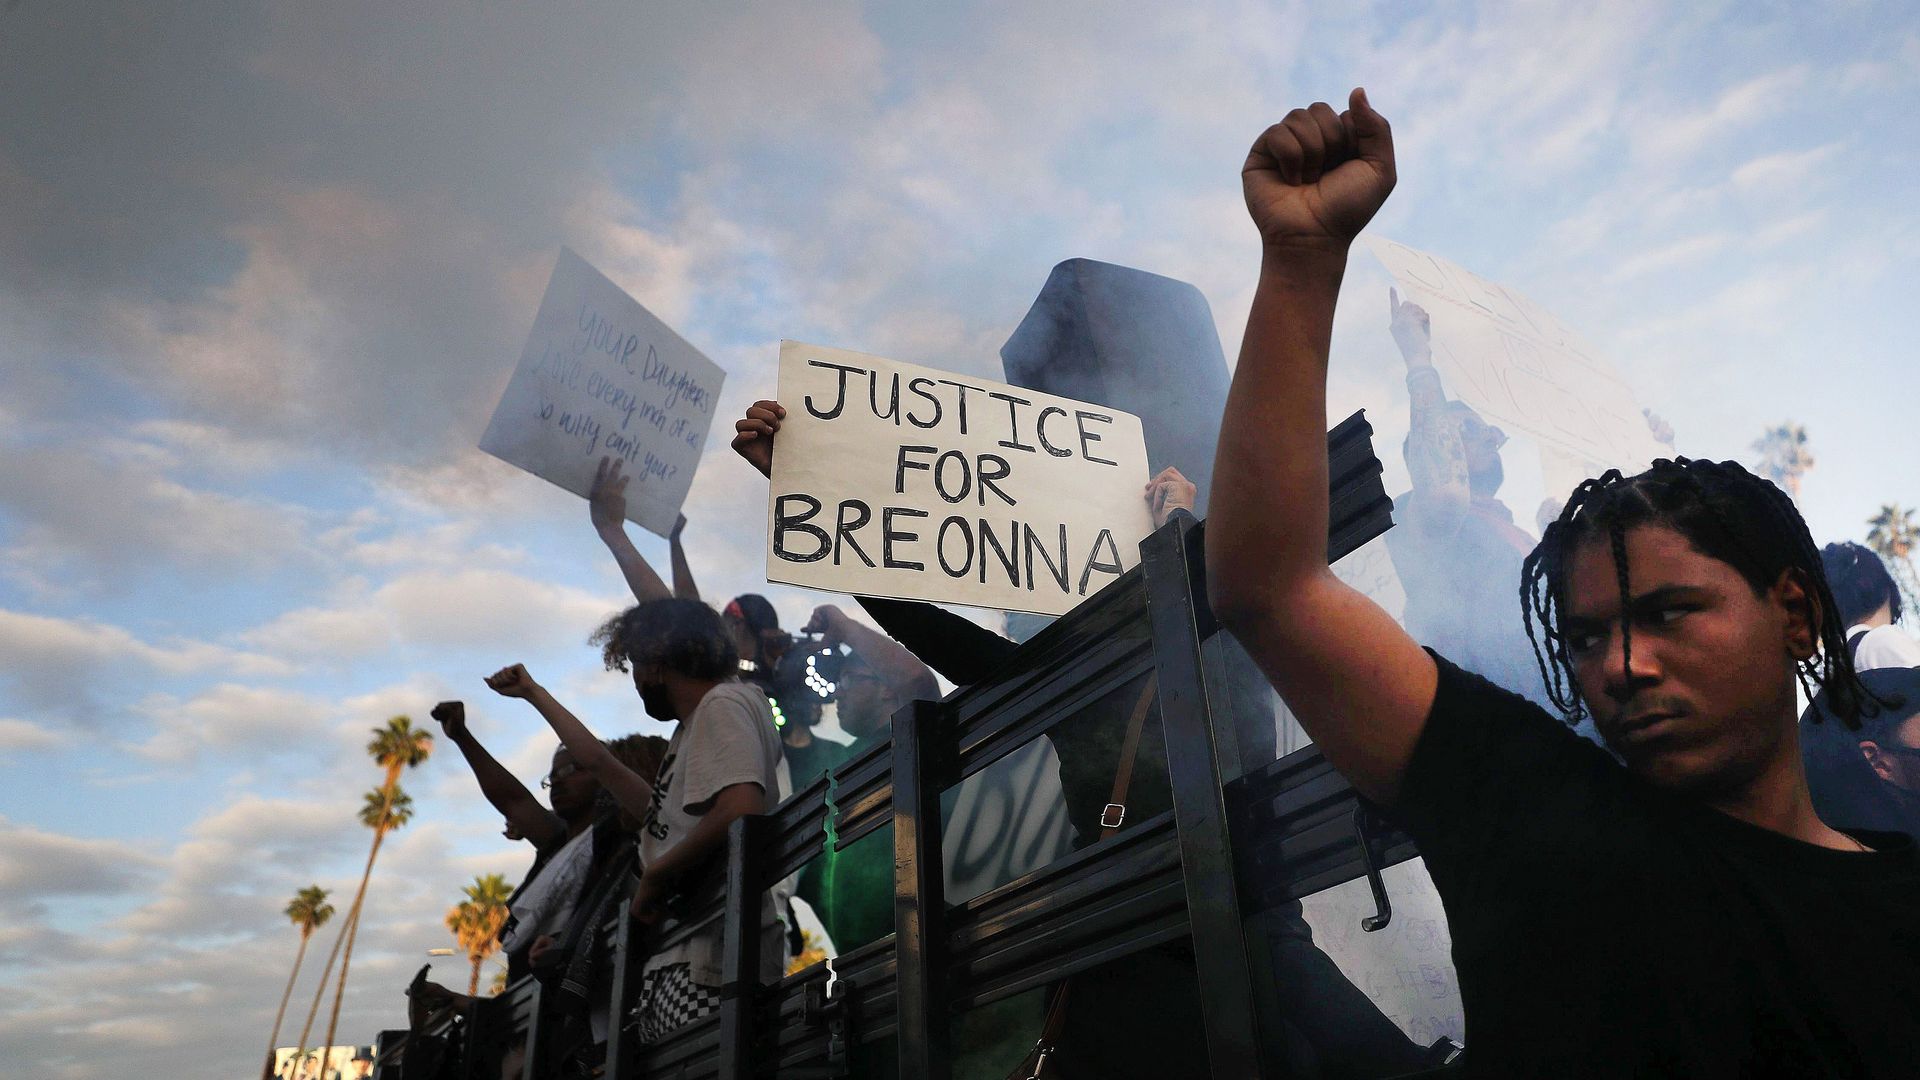 Protesters ride aboard a vehicle with a smoke machine, with a sign reading 'Justice for Breonna', during a peaceful demonstration